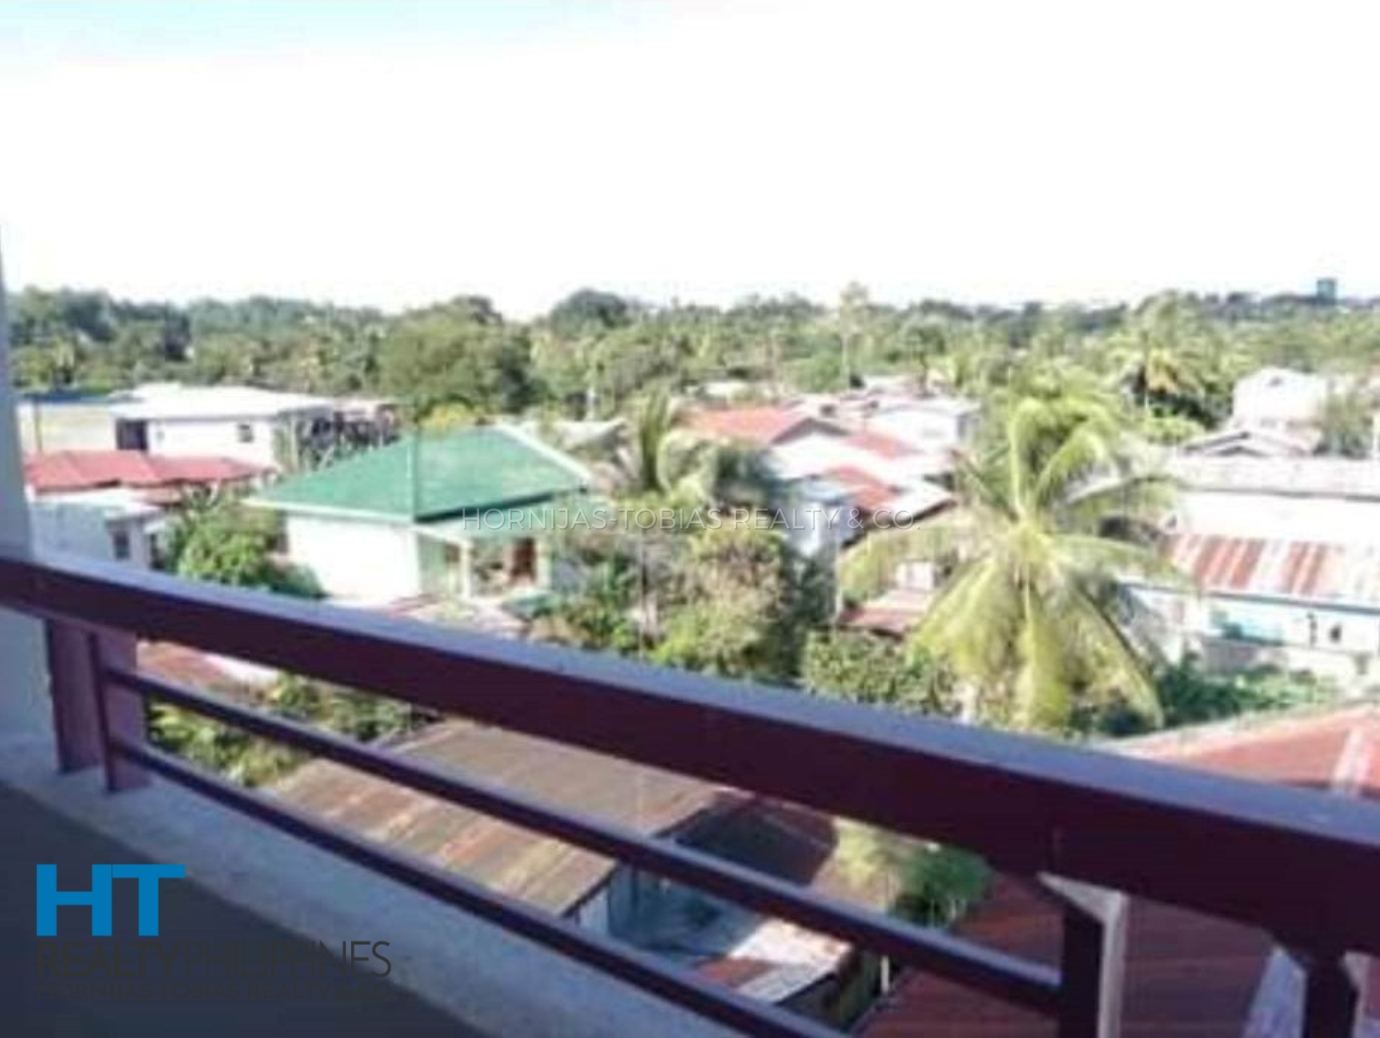 view from balcony - 12-door 4-floor income-generating apartment building for sale in Buhangin, Davao City